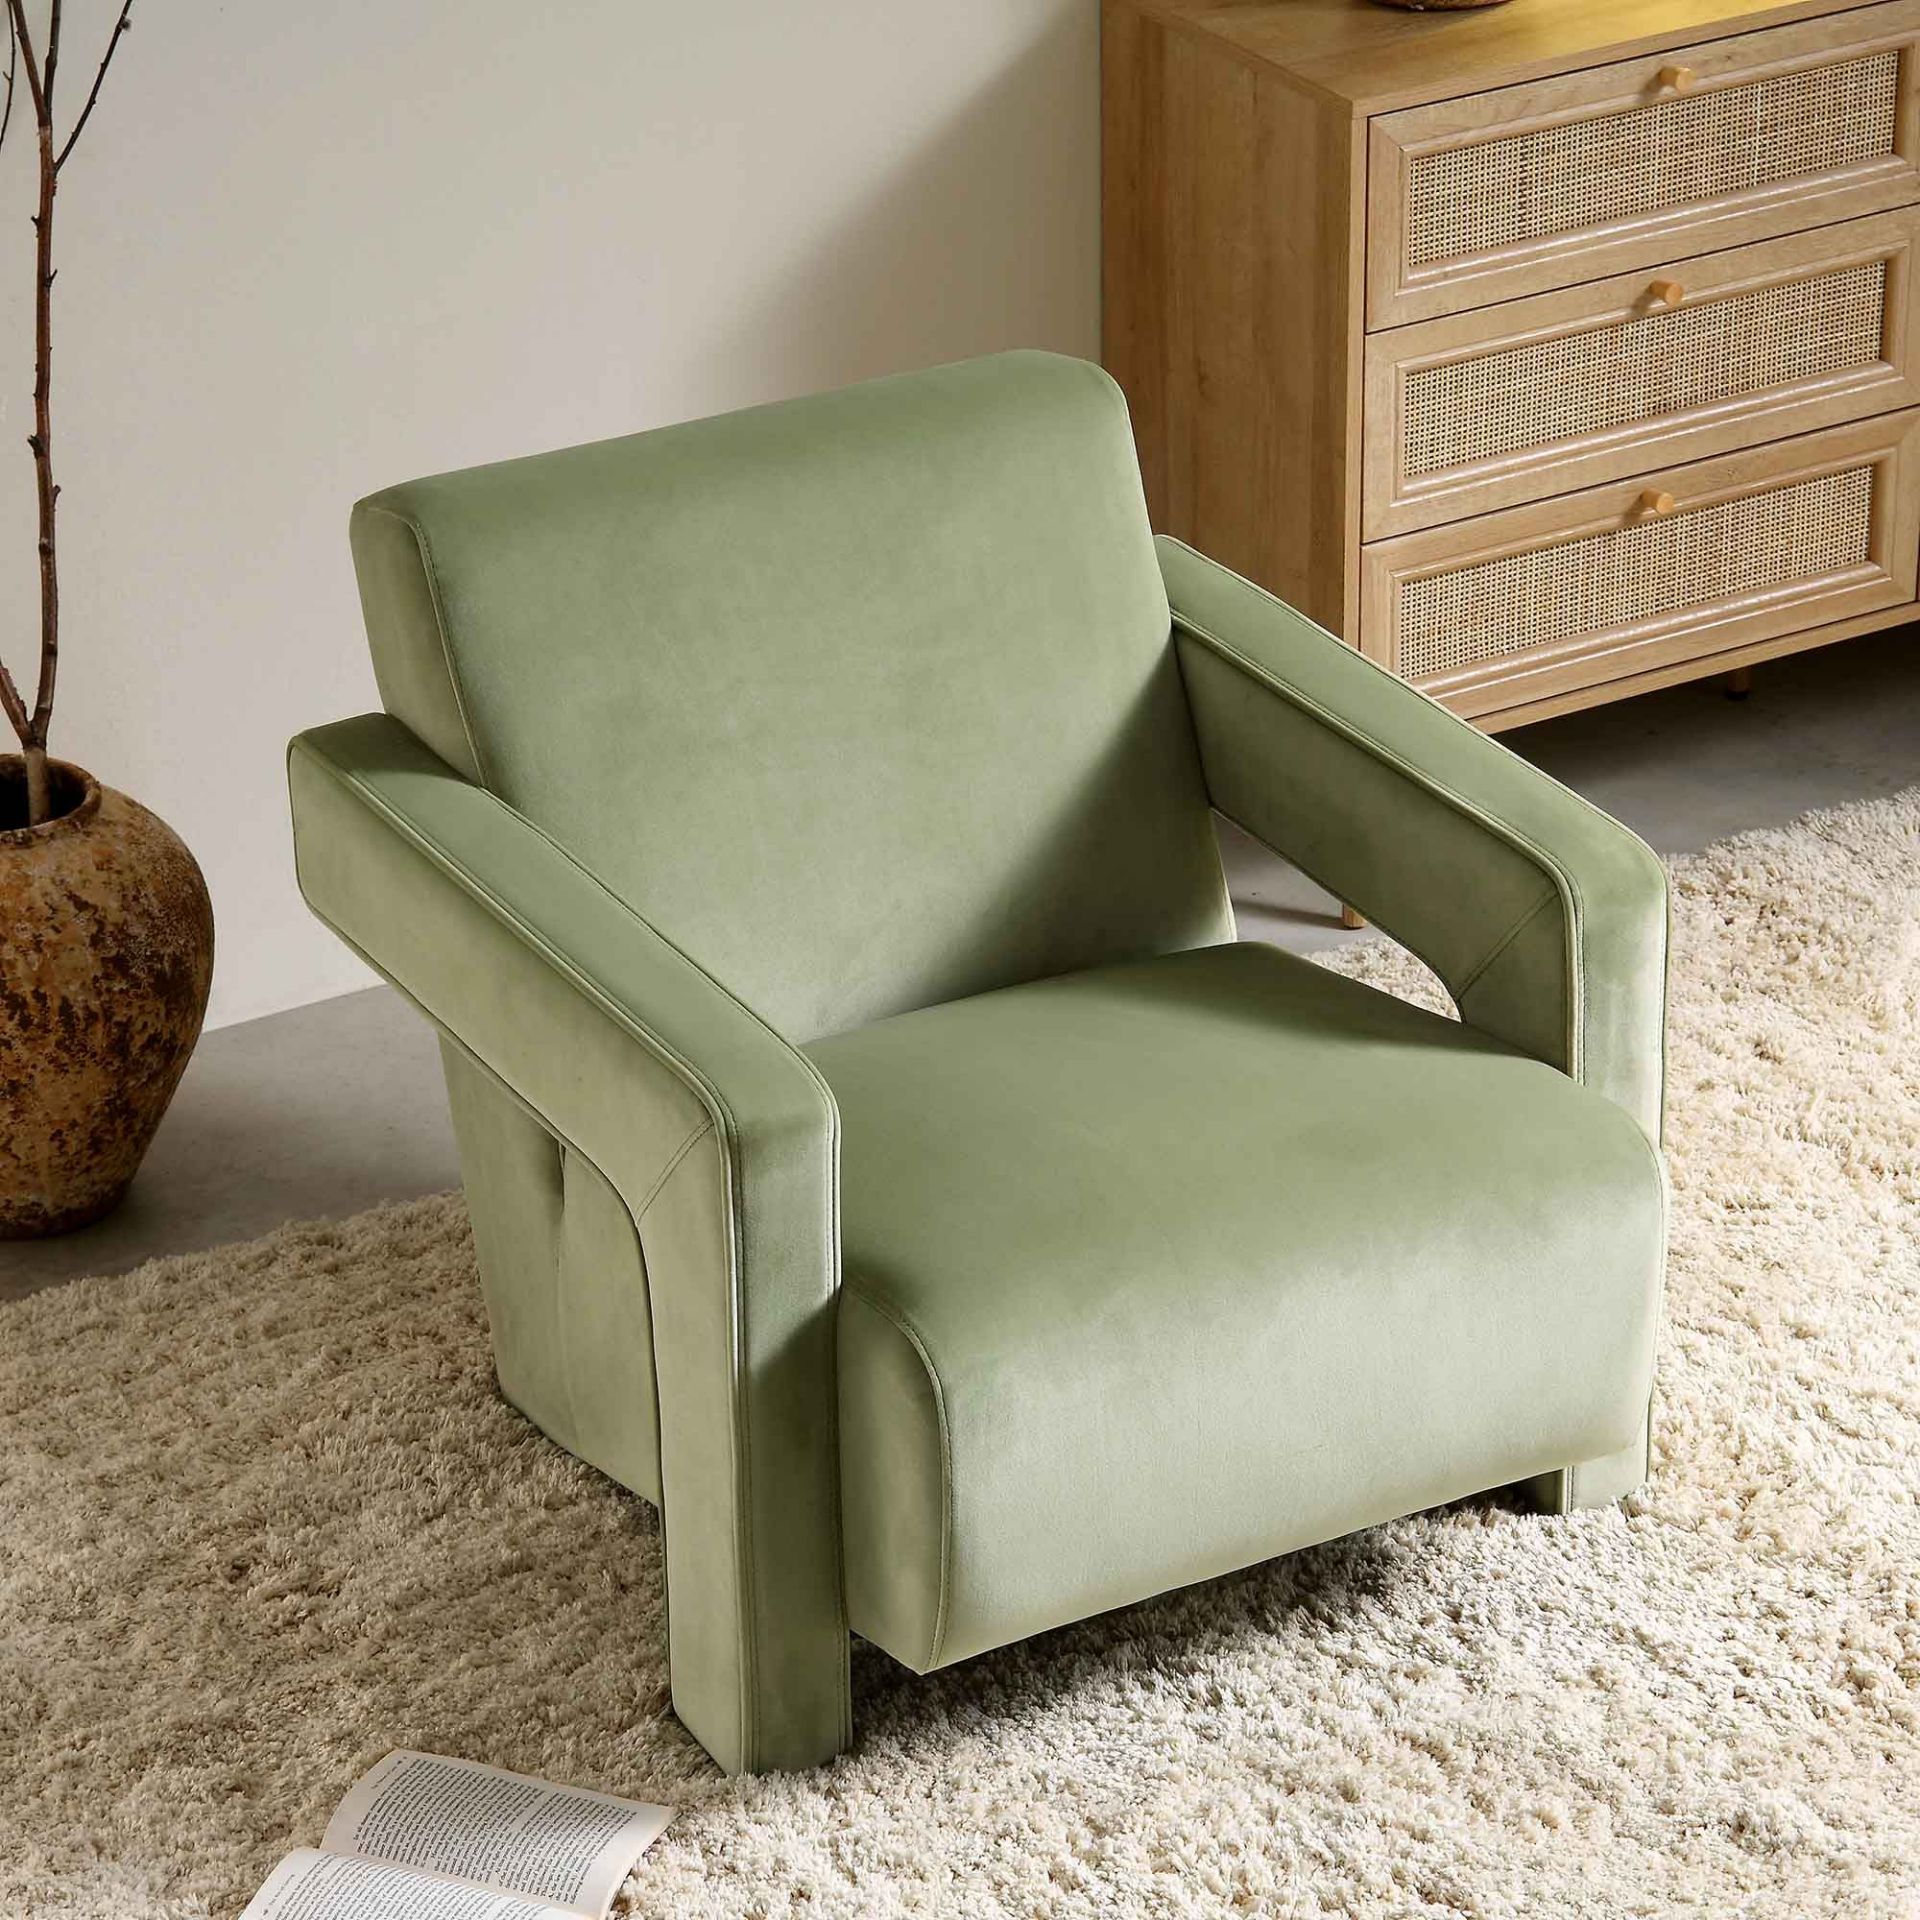 Brompton Sculptural Armchair, Lichen Velvet. - R19.5. RRP £349.99. The deep, slightly sloped seat - Image 2 of 2